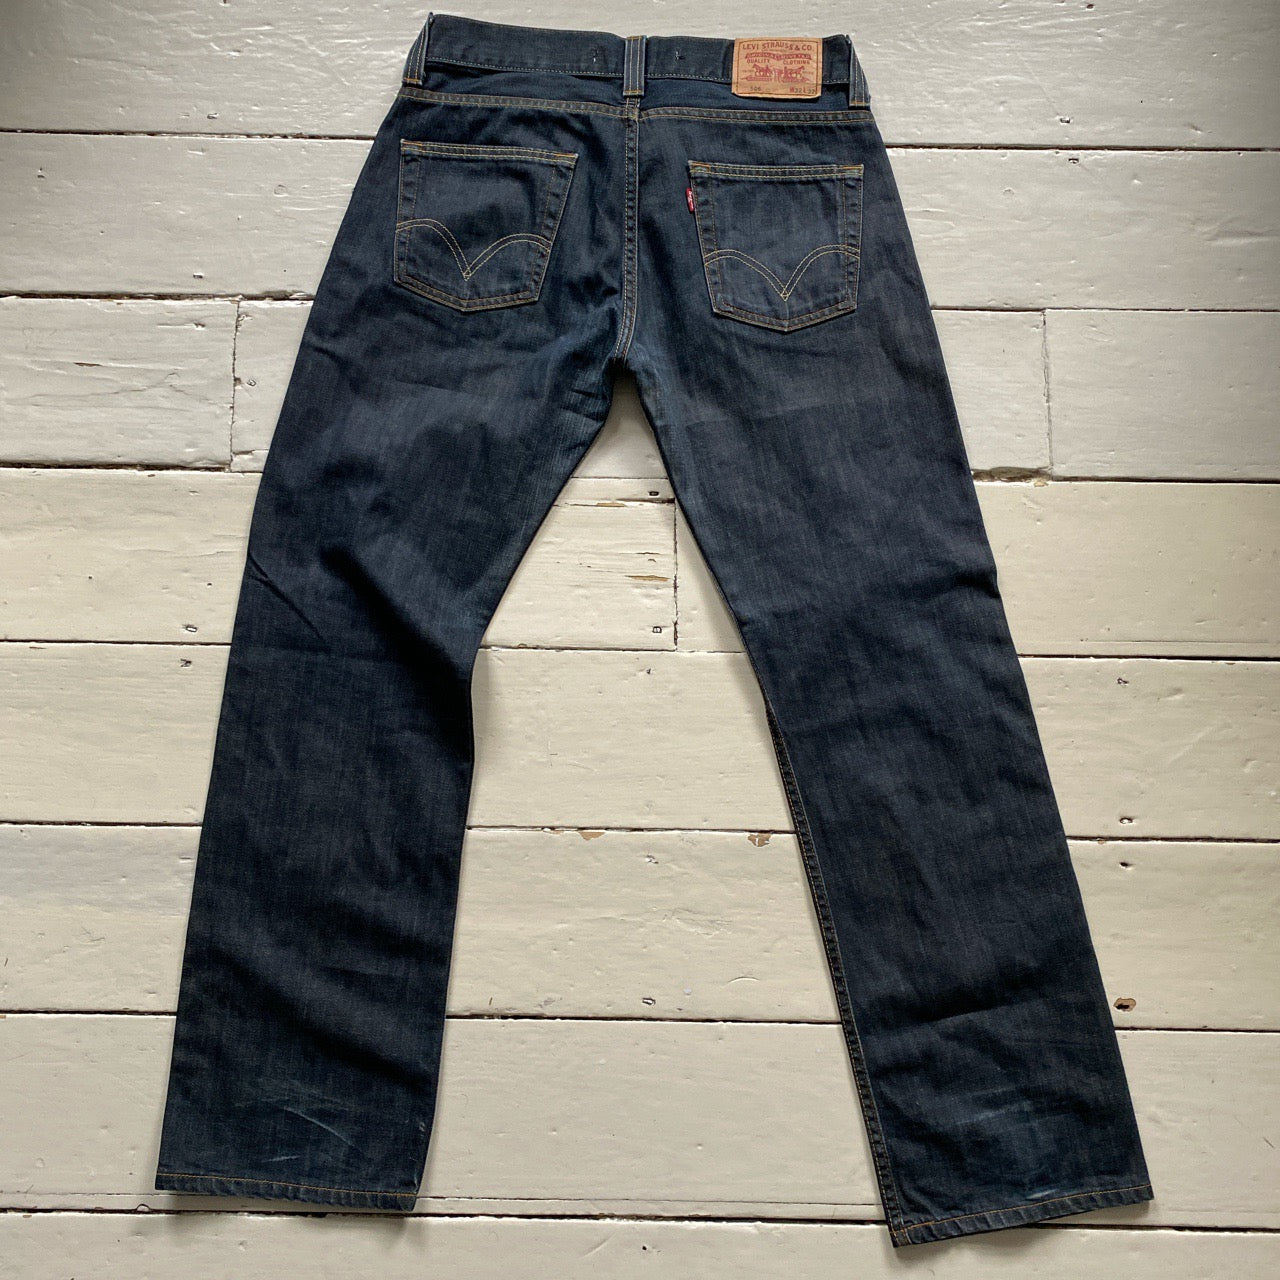 Levis 506 Straight Navy Jeans (32/32)